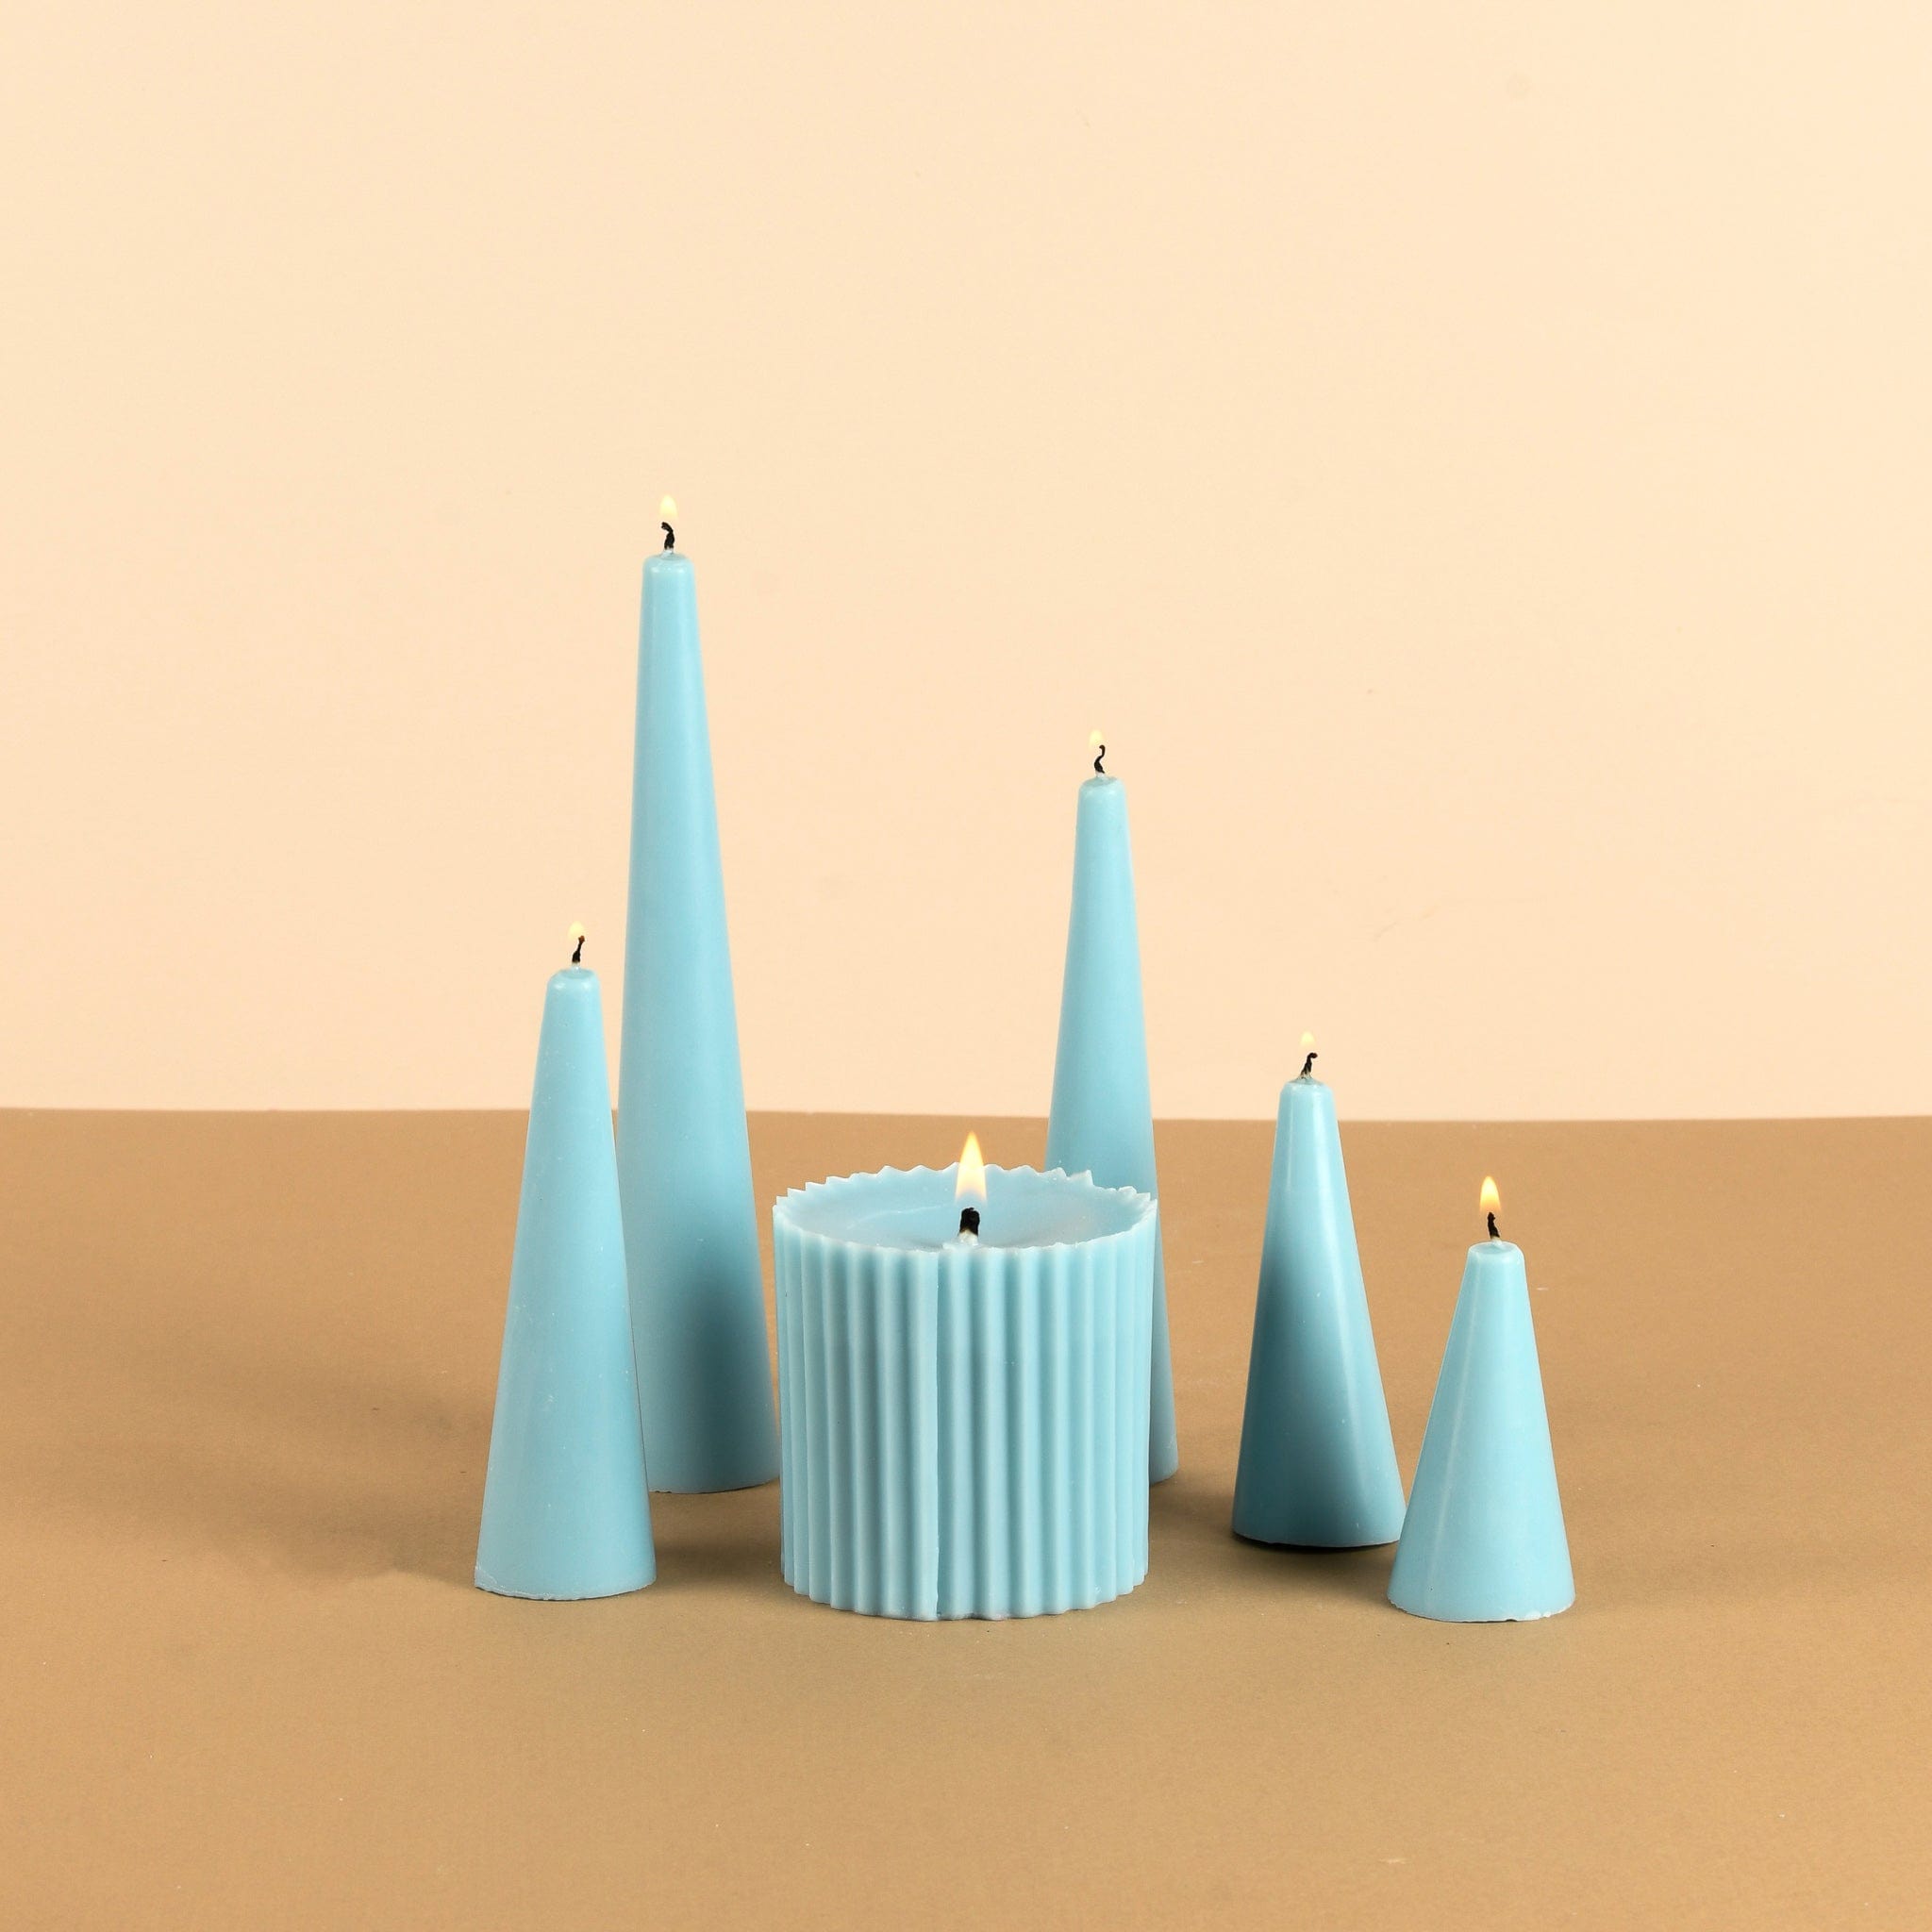 Infinity Set of 6 Powder Blue Candles - Oceanic Mist Scented